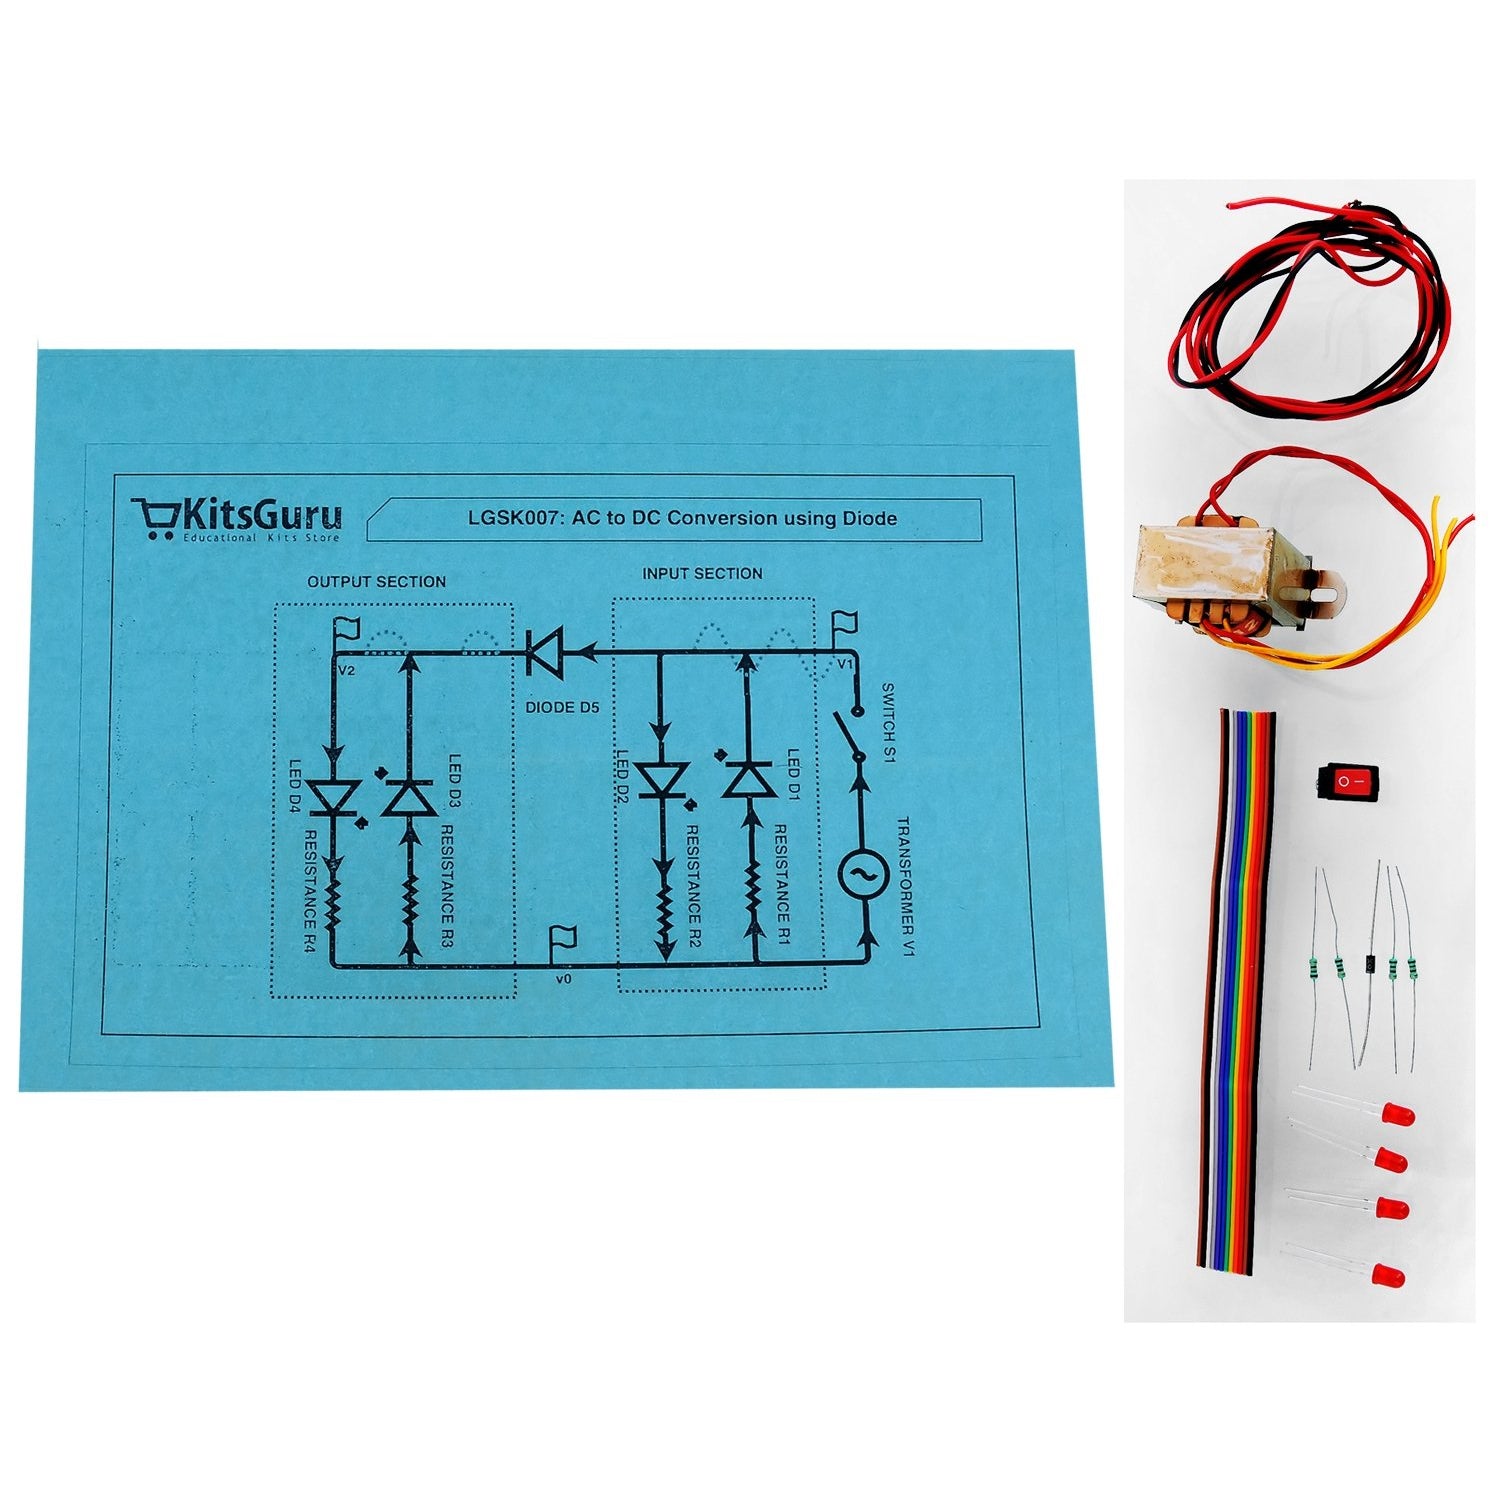 ac-to-dc-conversion-using-diode-full-wave-rectifier.jpg